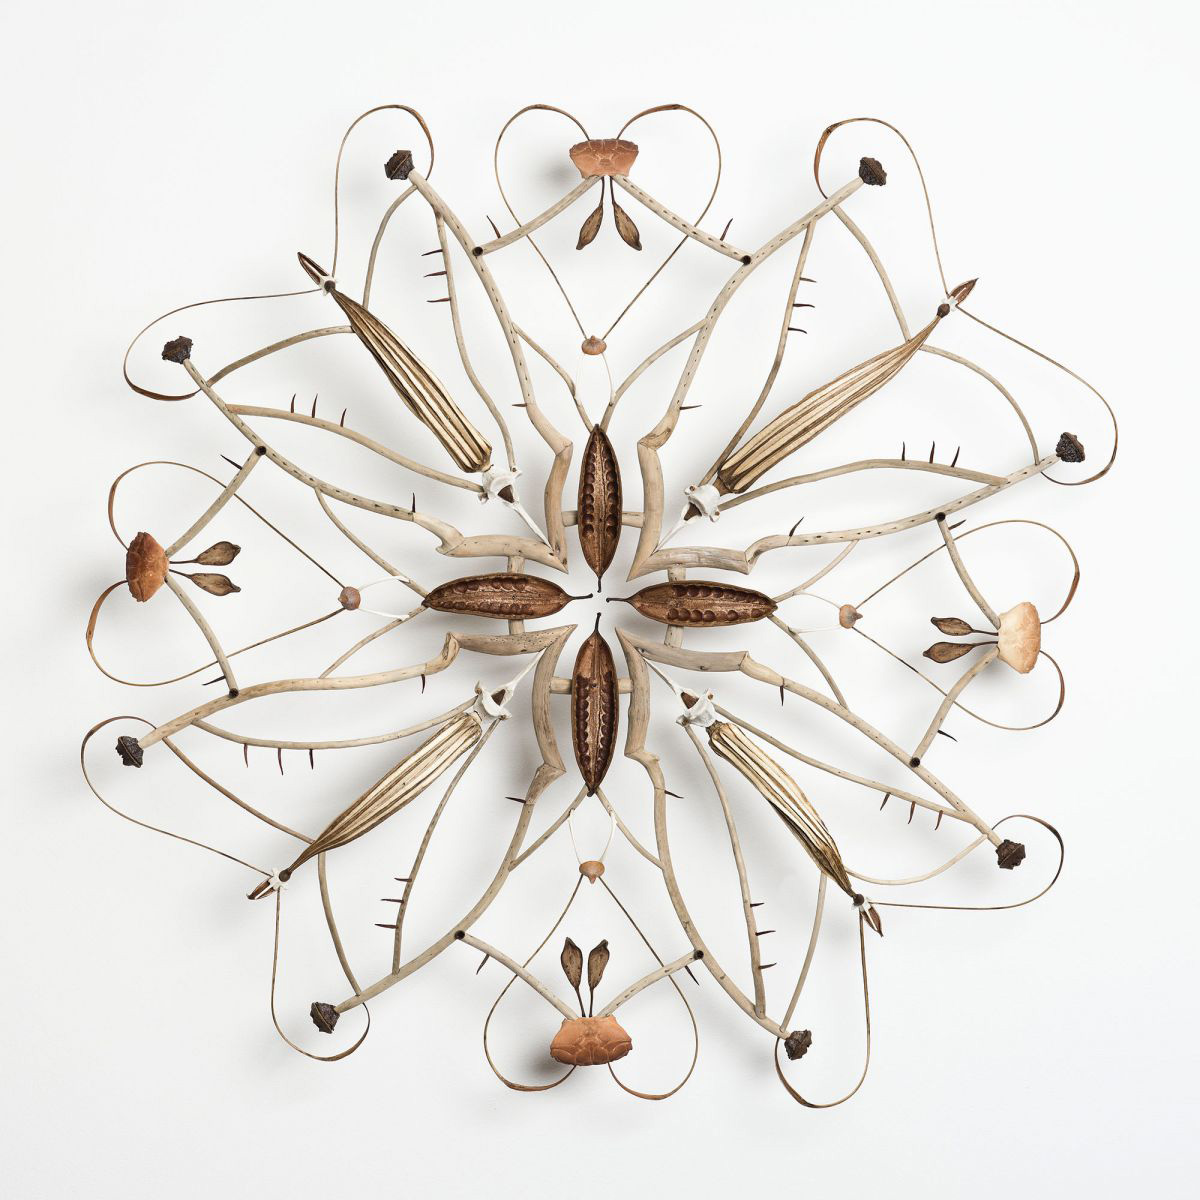 Offering, sculptural assemblages by Shona Wilson